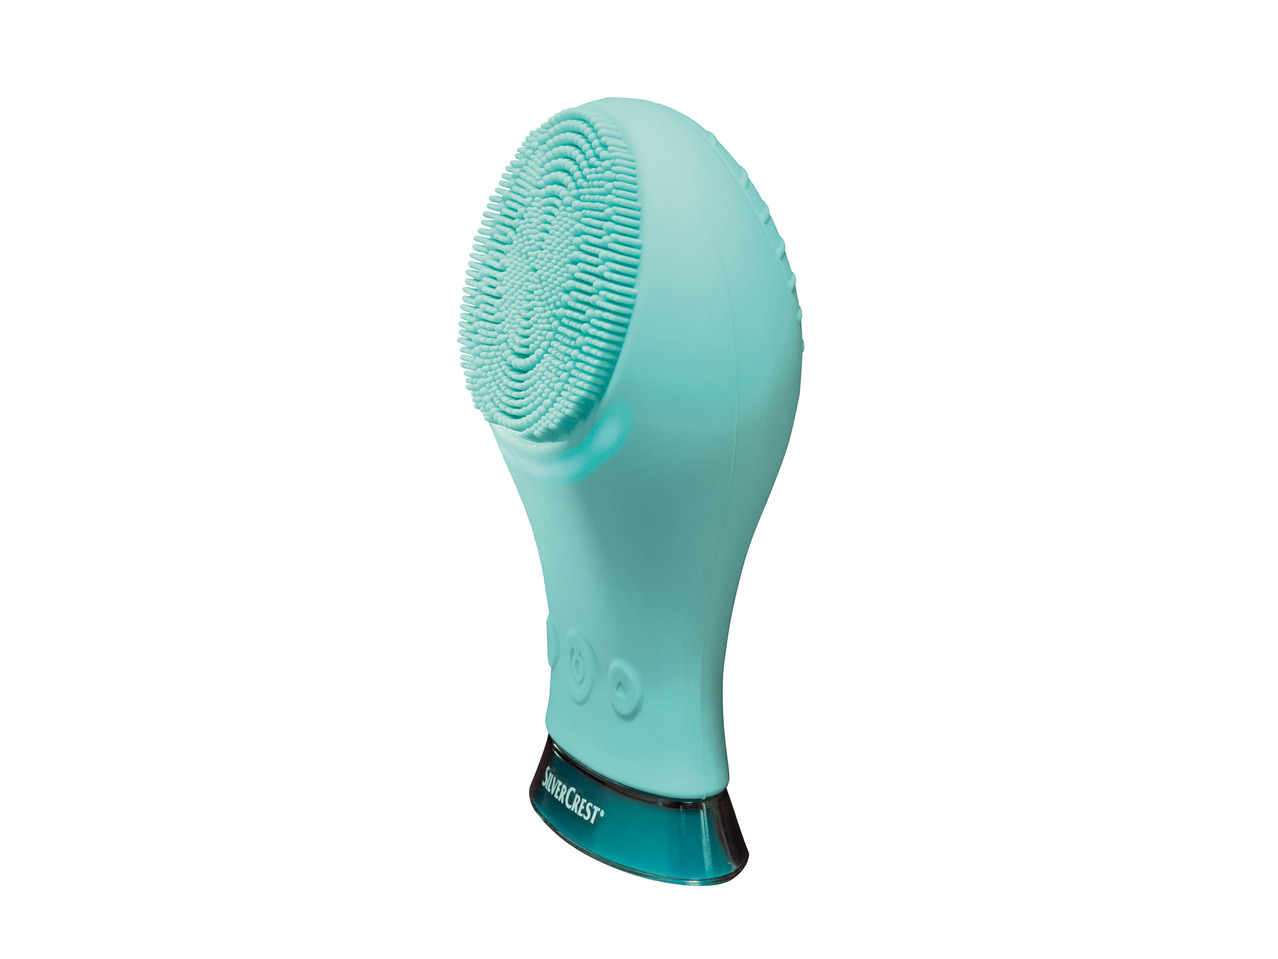 Silvercrest Personal Care Silicone Facial Cleansing Brush1